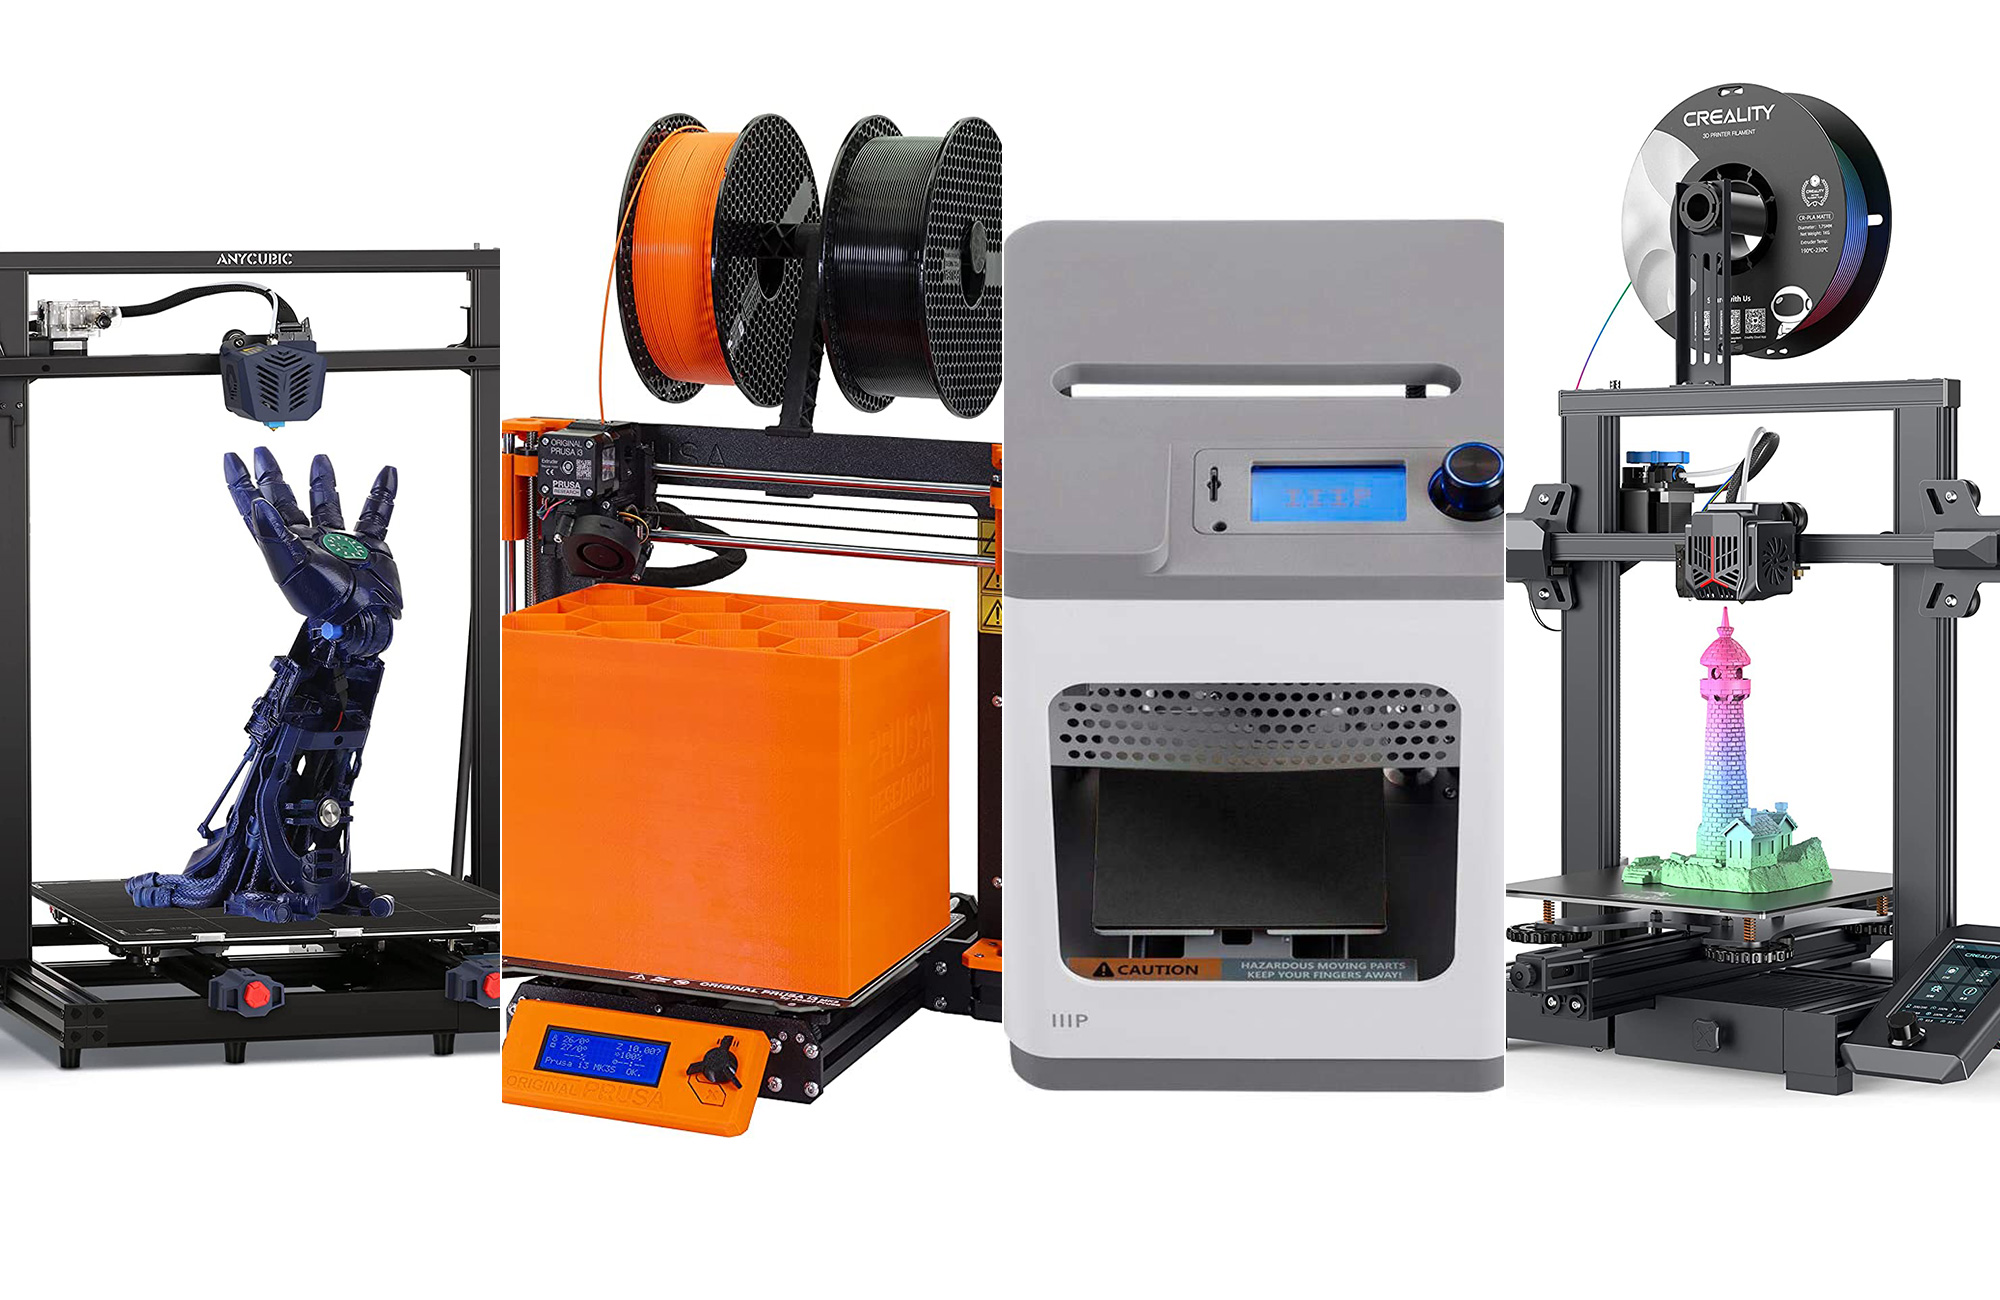 Miedo a morir Nosotros mismos inicial The best 3D printers for beginners | Popular Science